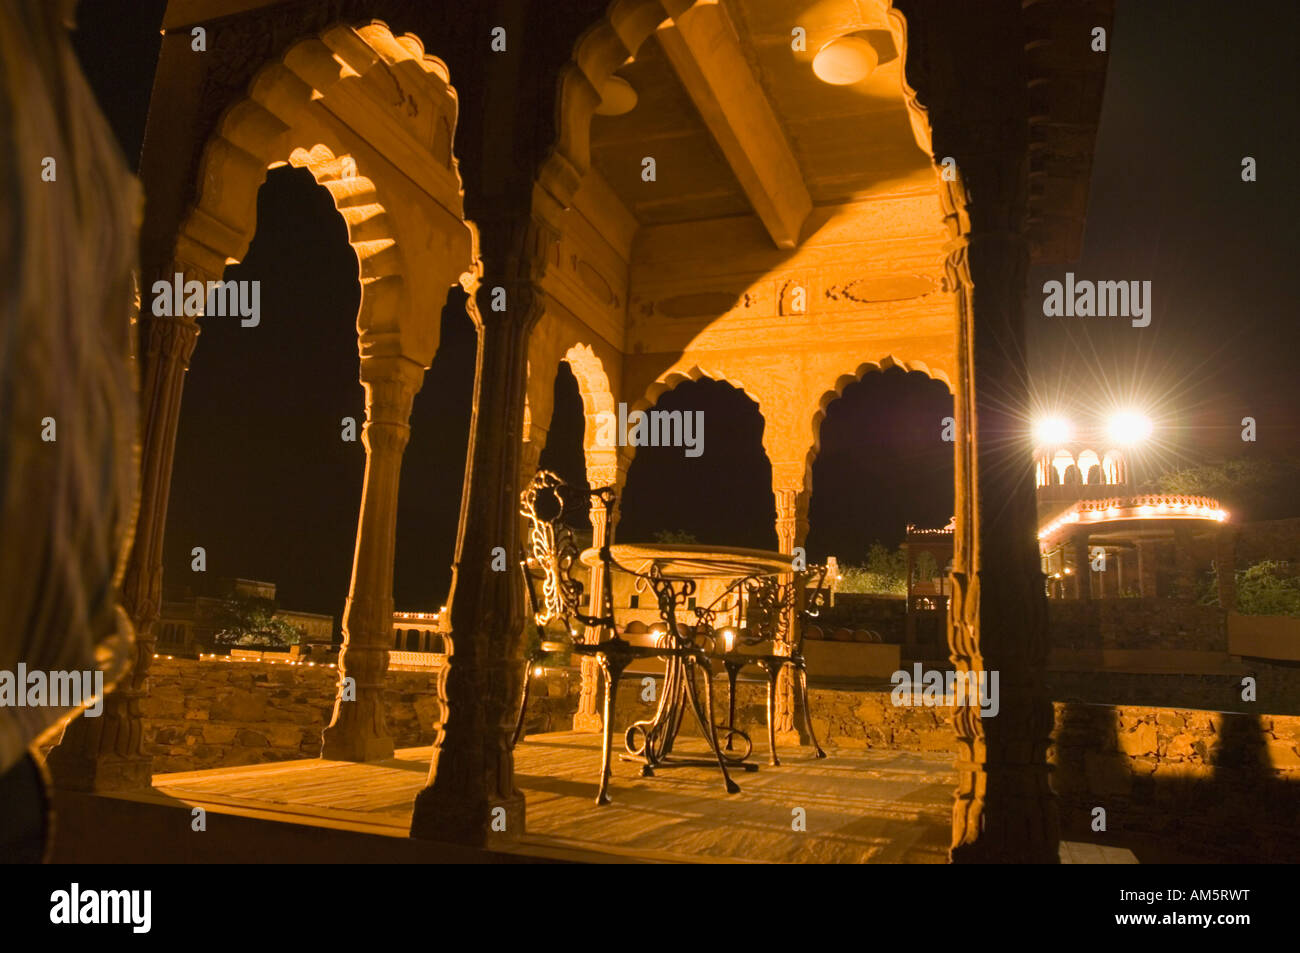 Two iron chairs in a fort at night, Neemrana Fort, Alwar, Rajasthan, India Stock Photo